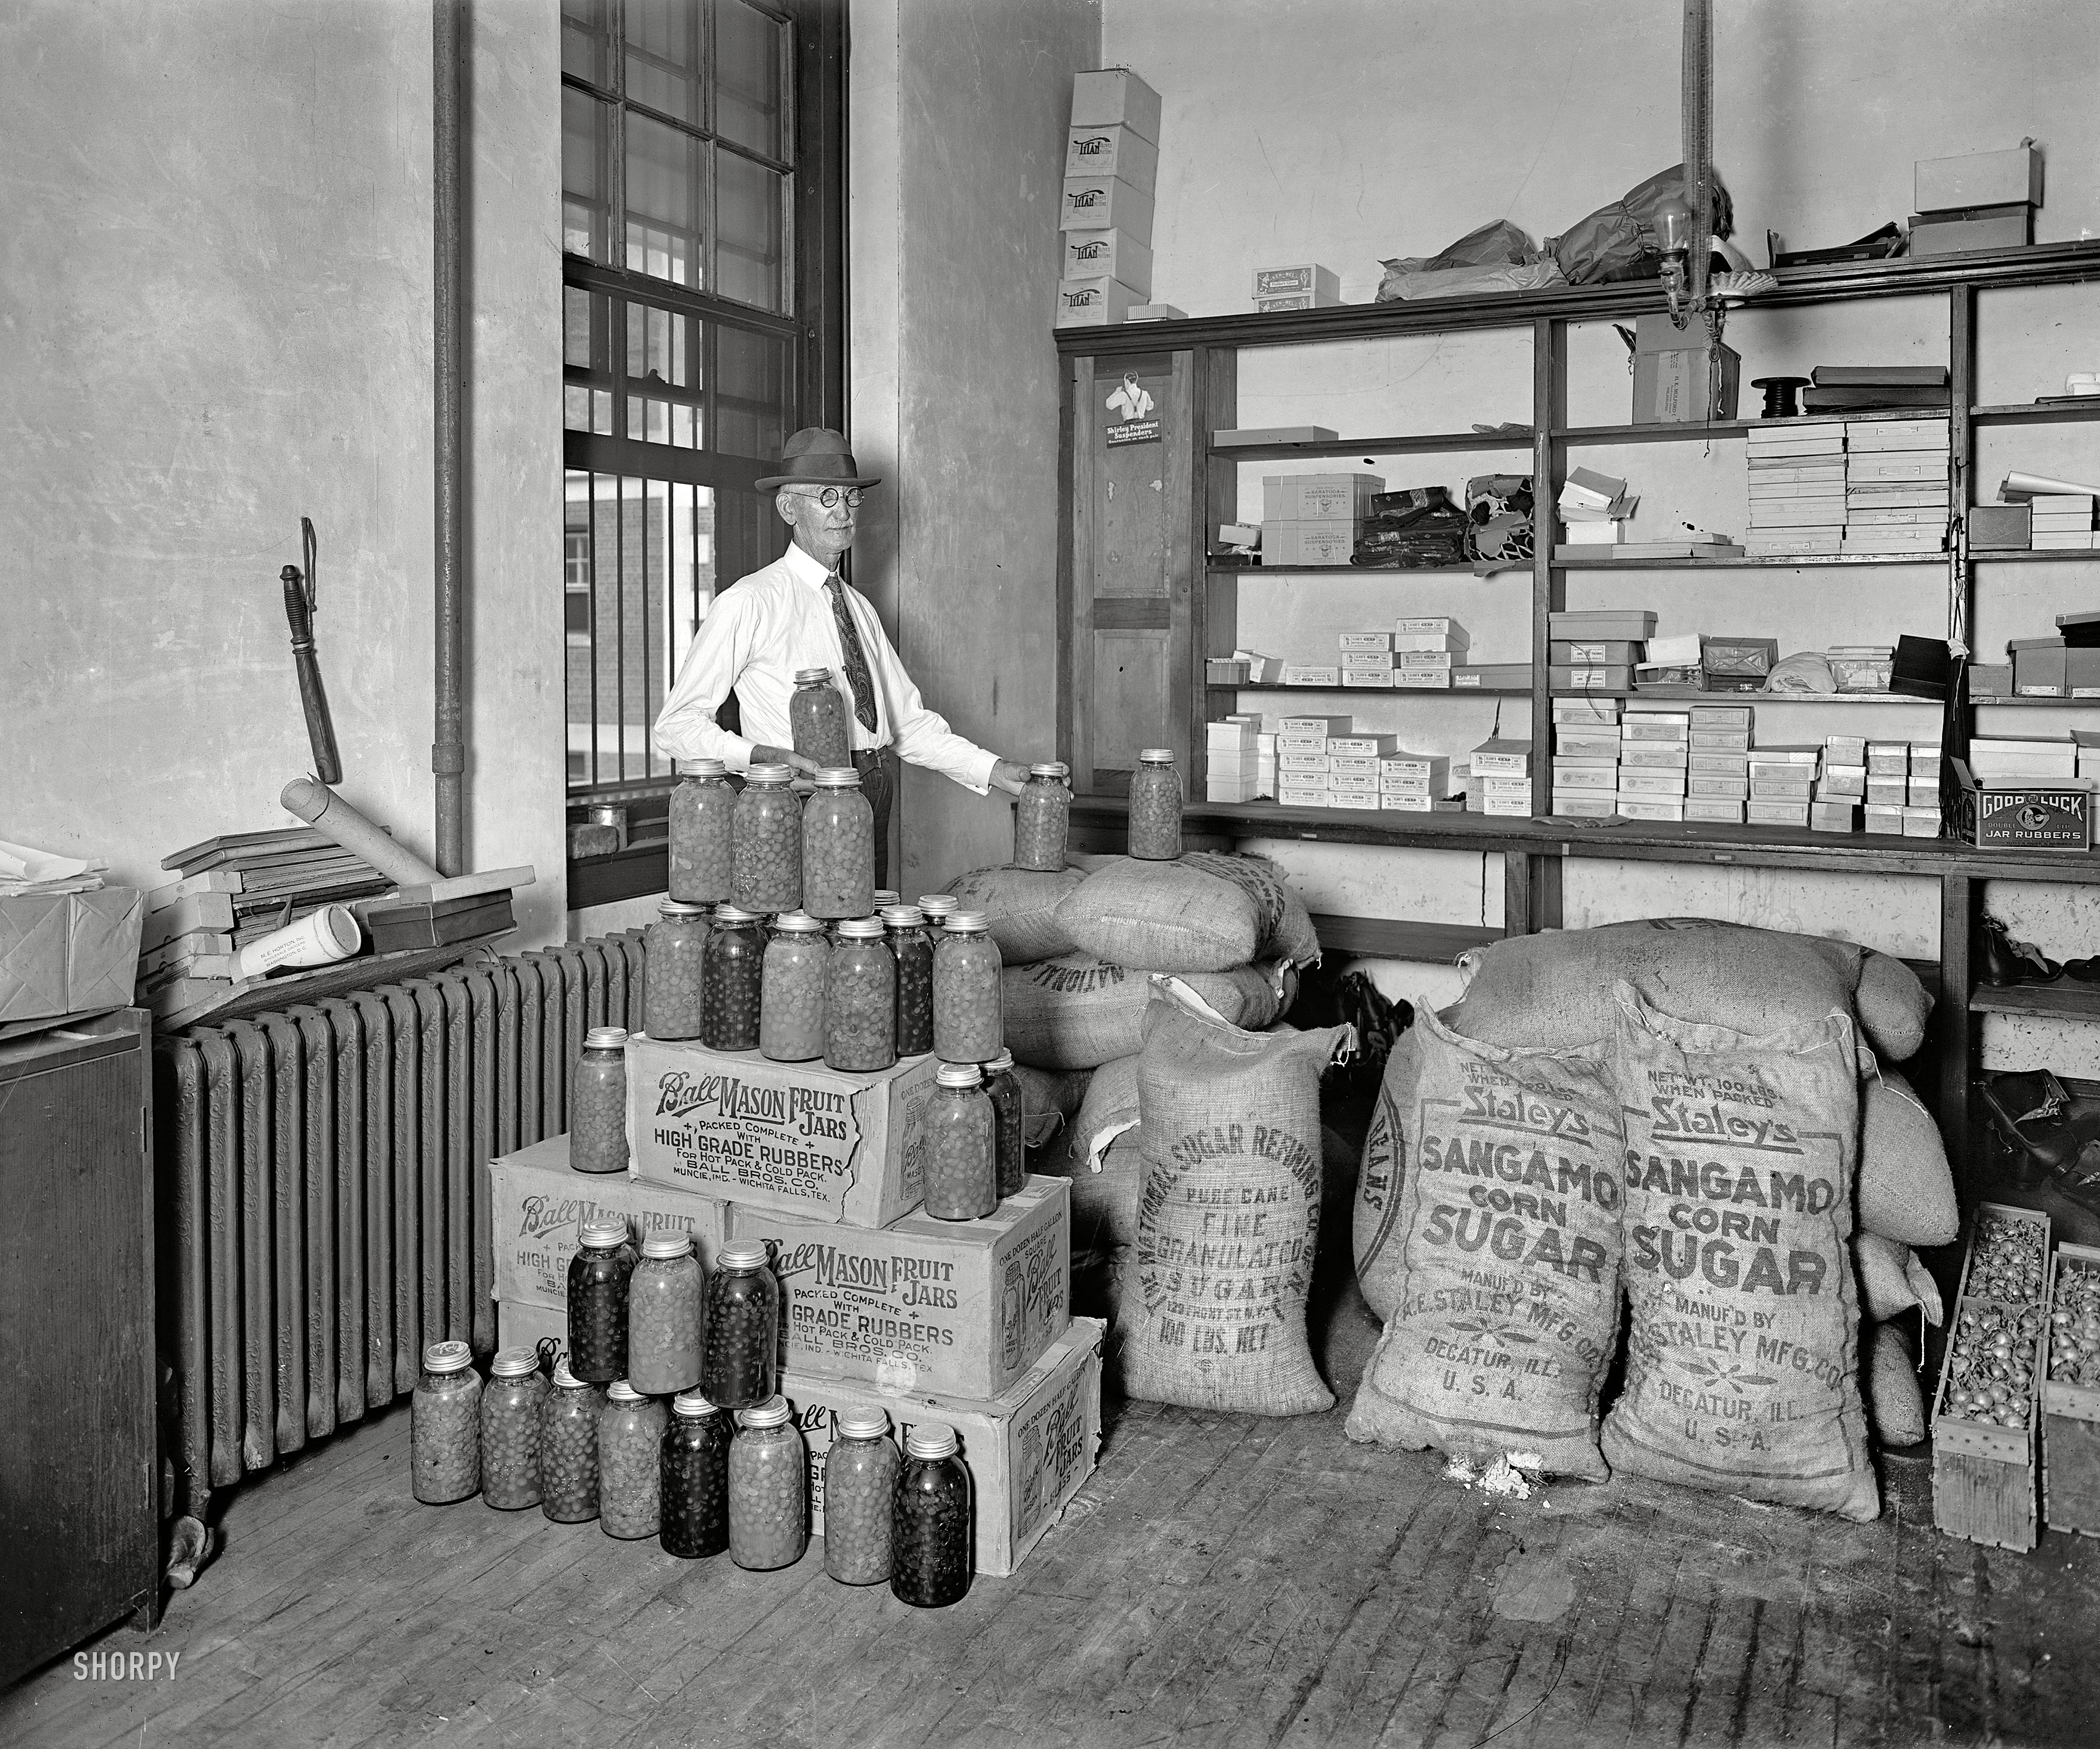 Washington, D.C., circa 1929. "Utilization of confiscated bootleg paraphernalia." Waste not, want not, especially when it comes to "jar rubbers." View full size.